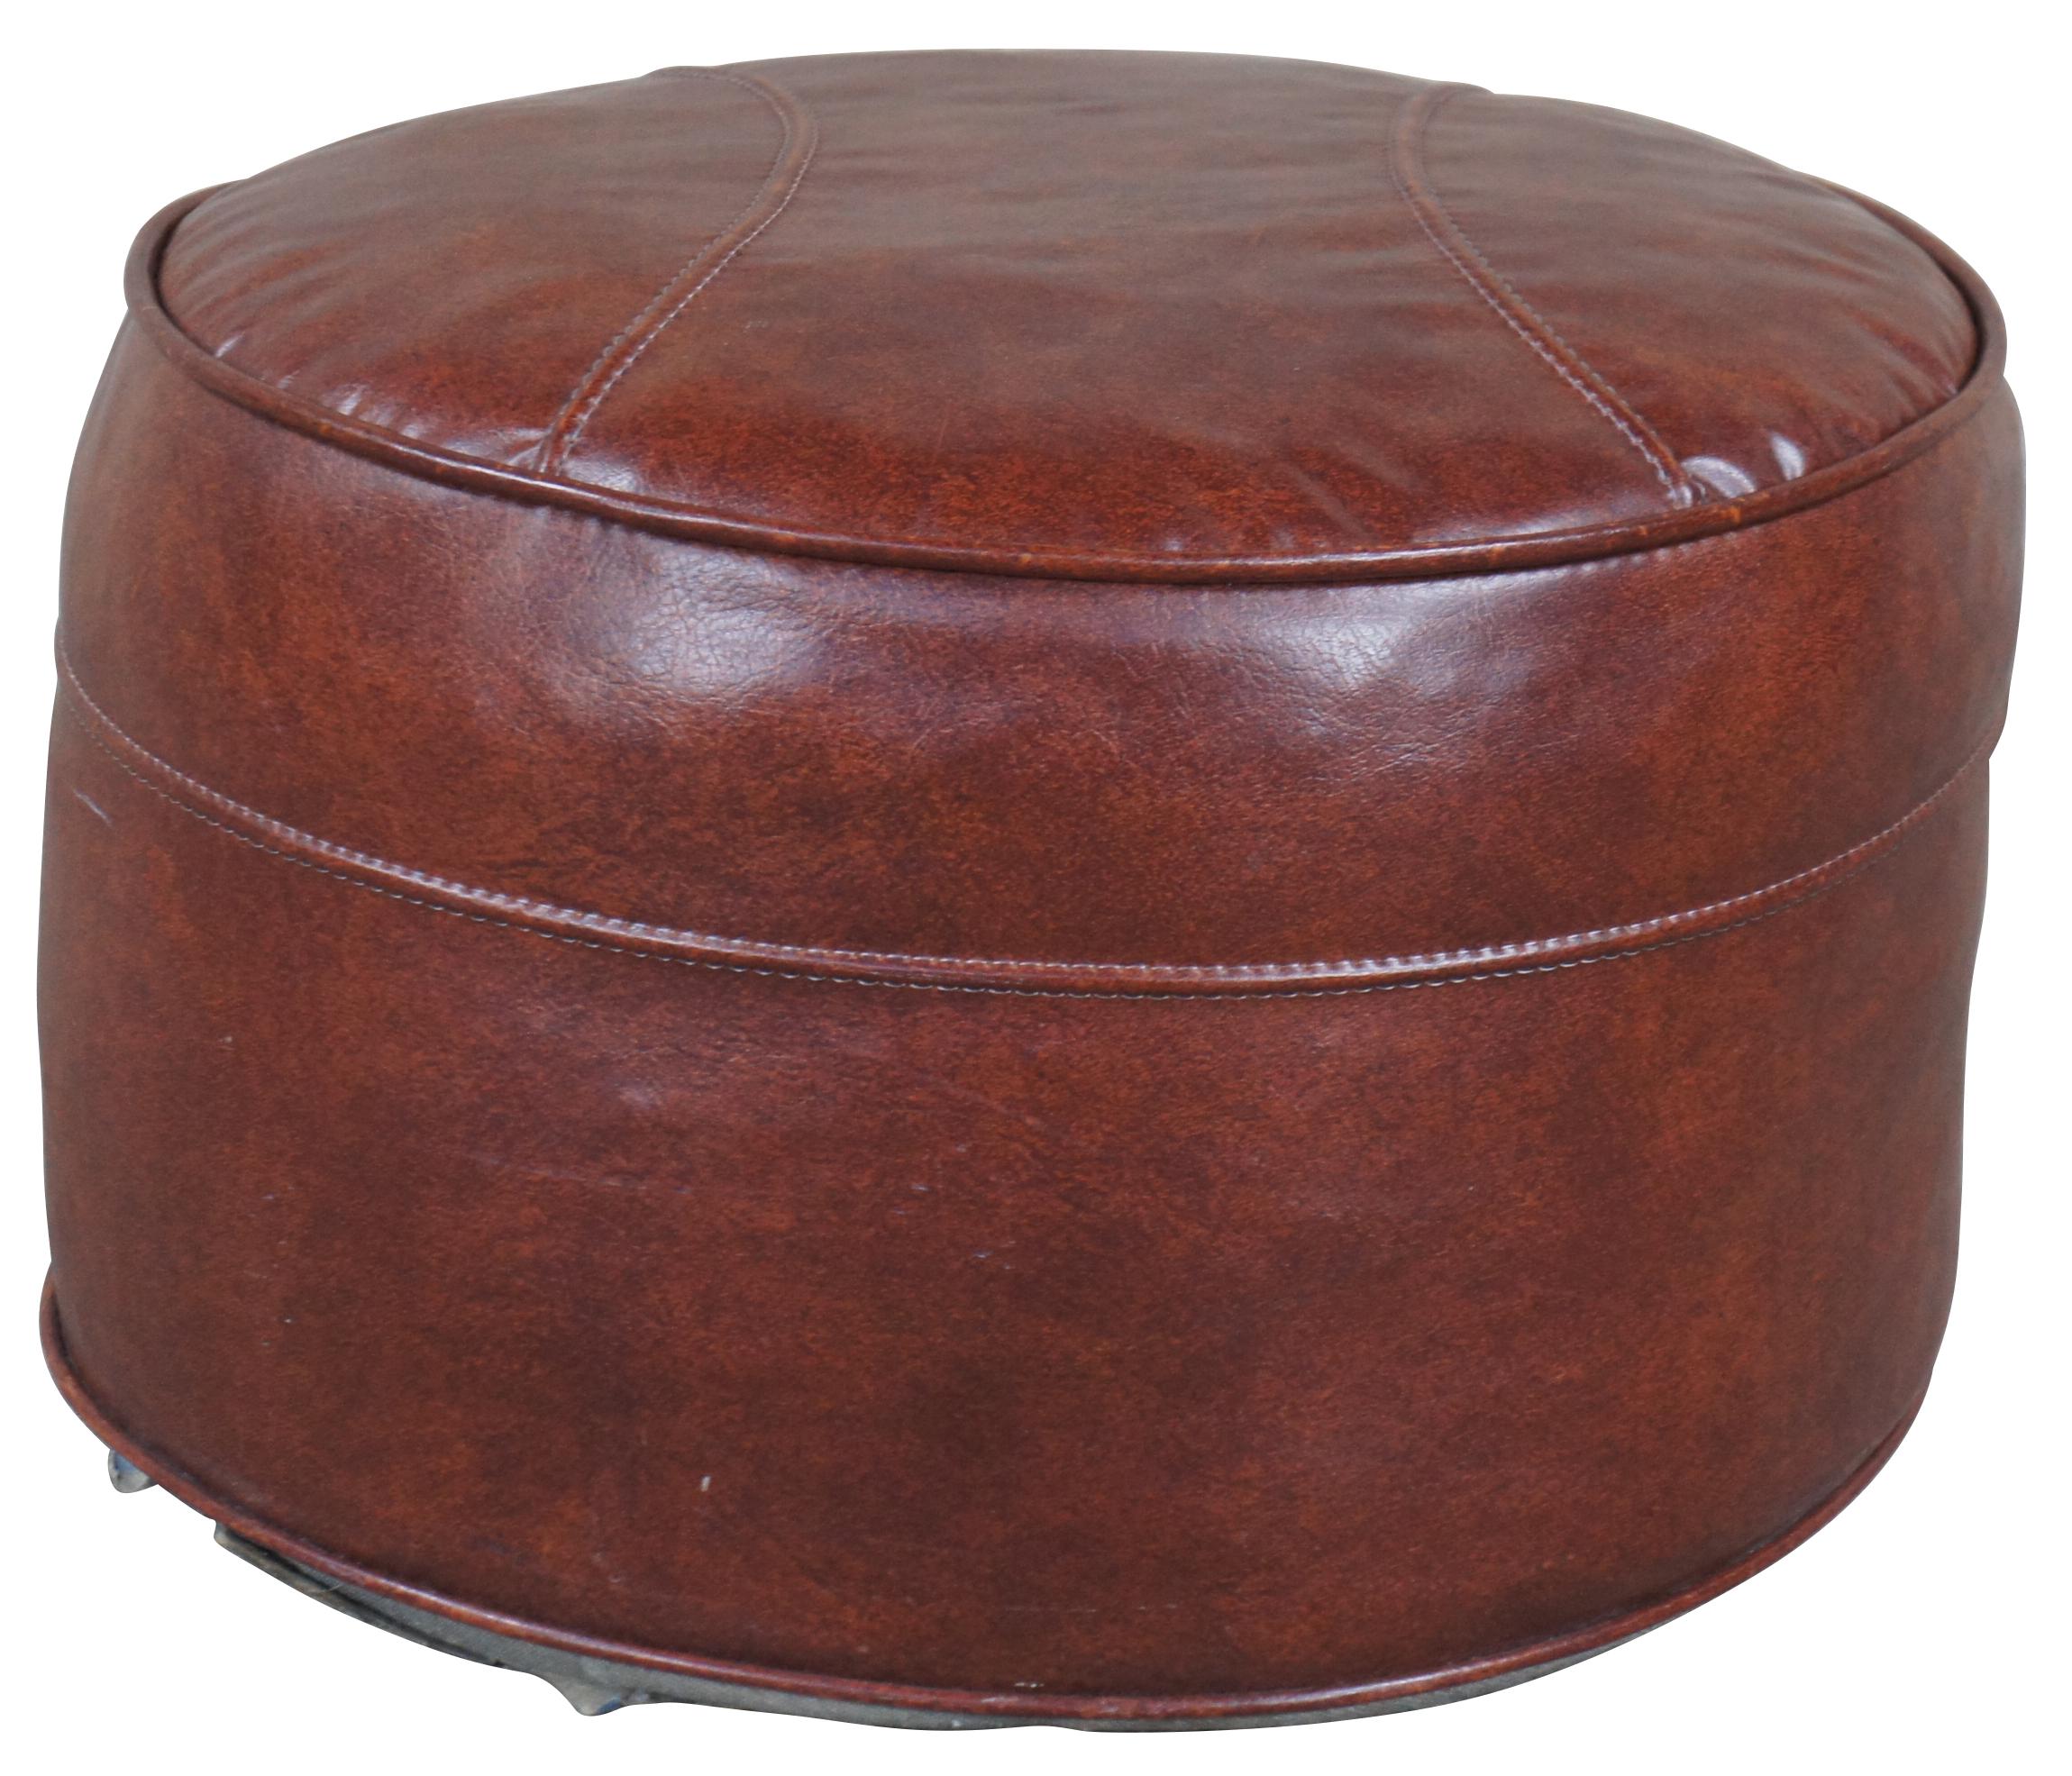 Mid Century Brown Vinyl Ottoman or Pouf. Features a squat round form with baseball shaped stitch.
